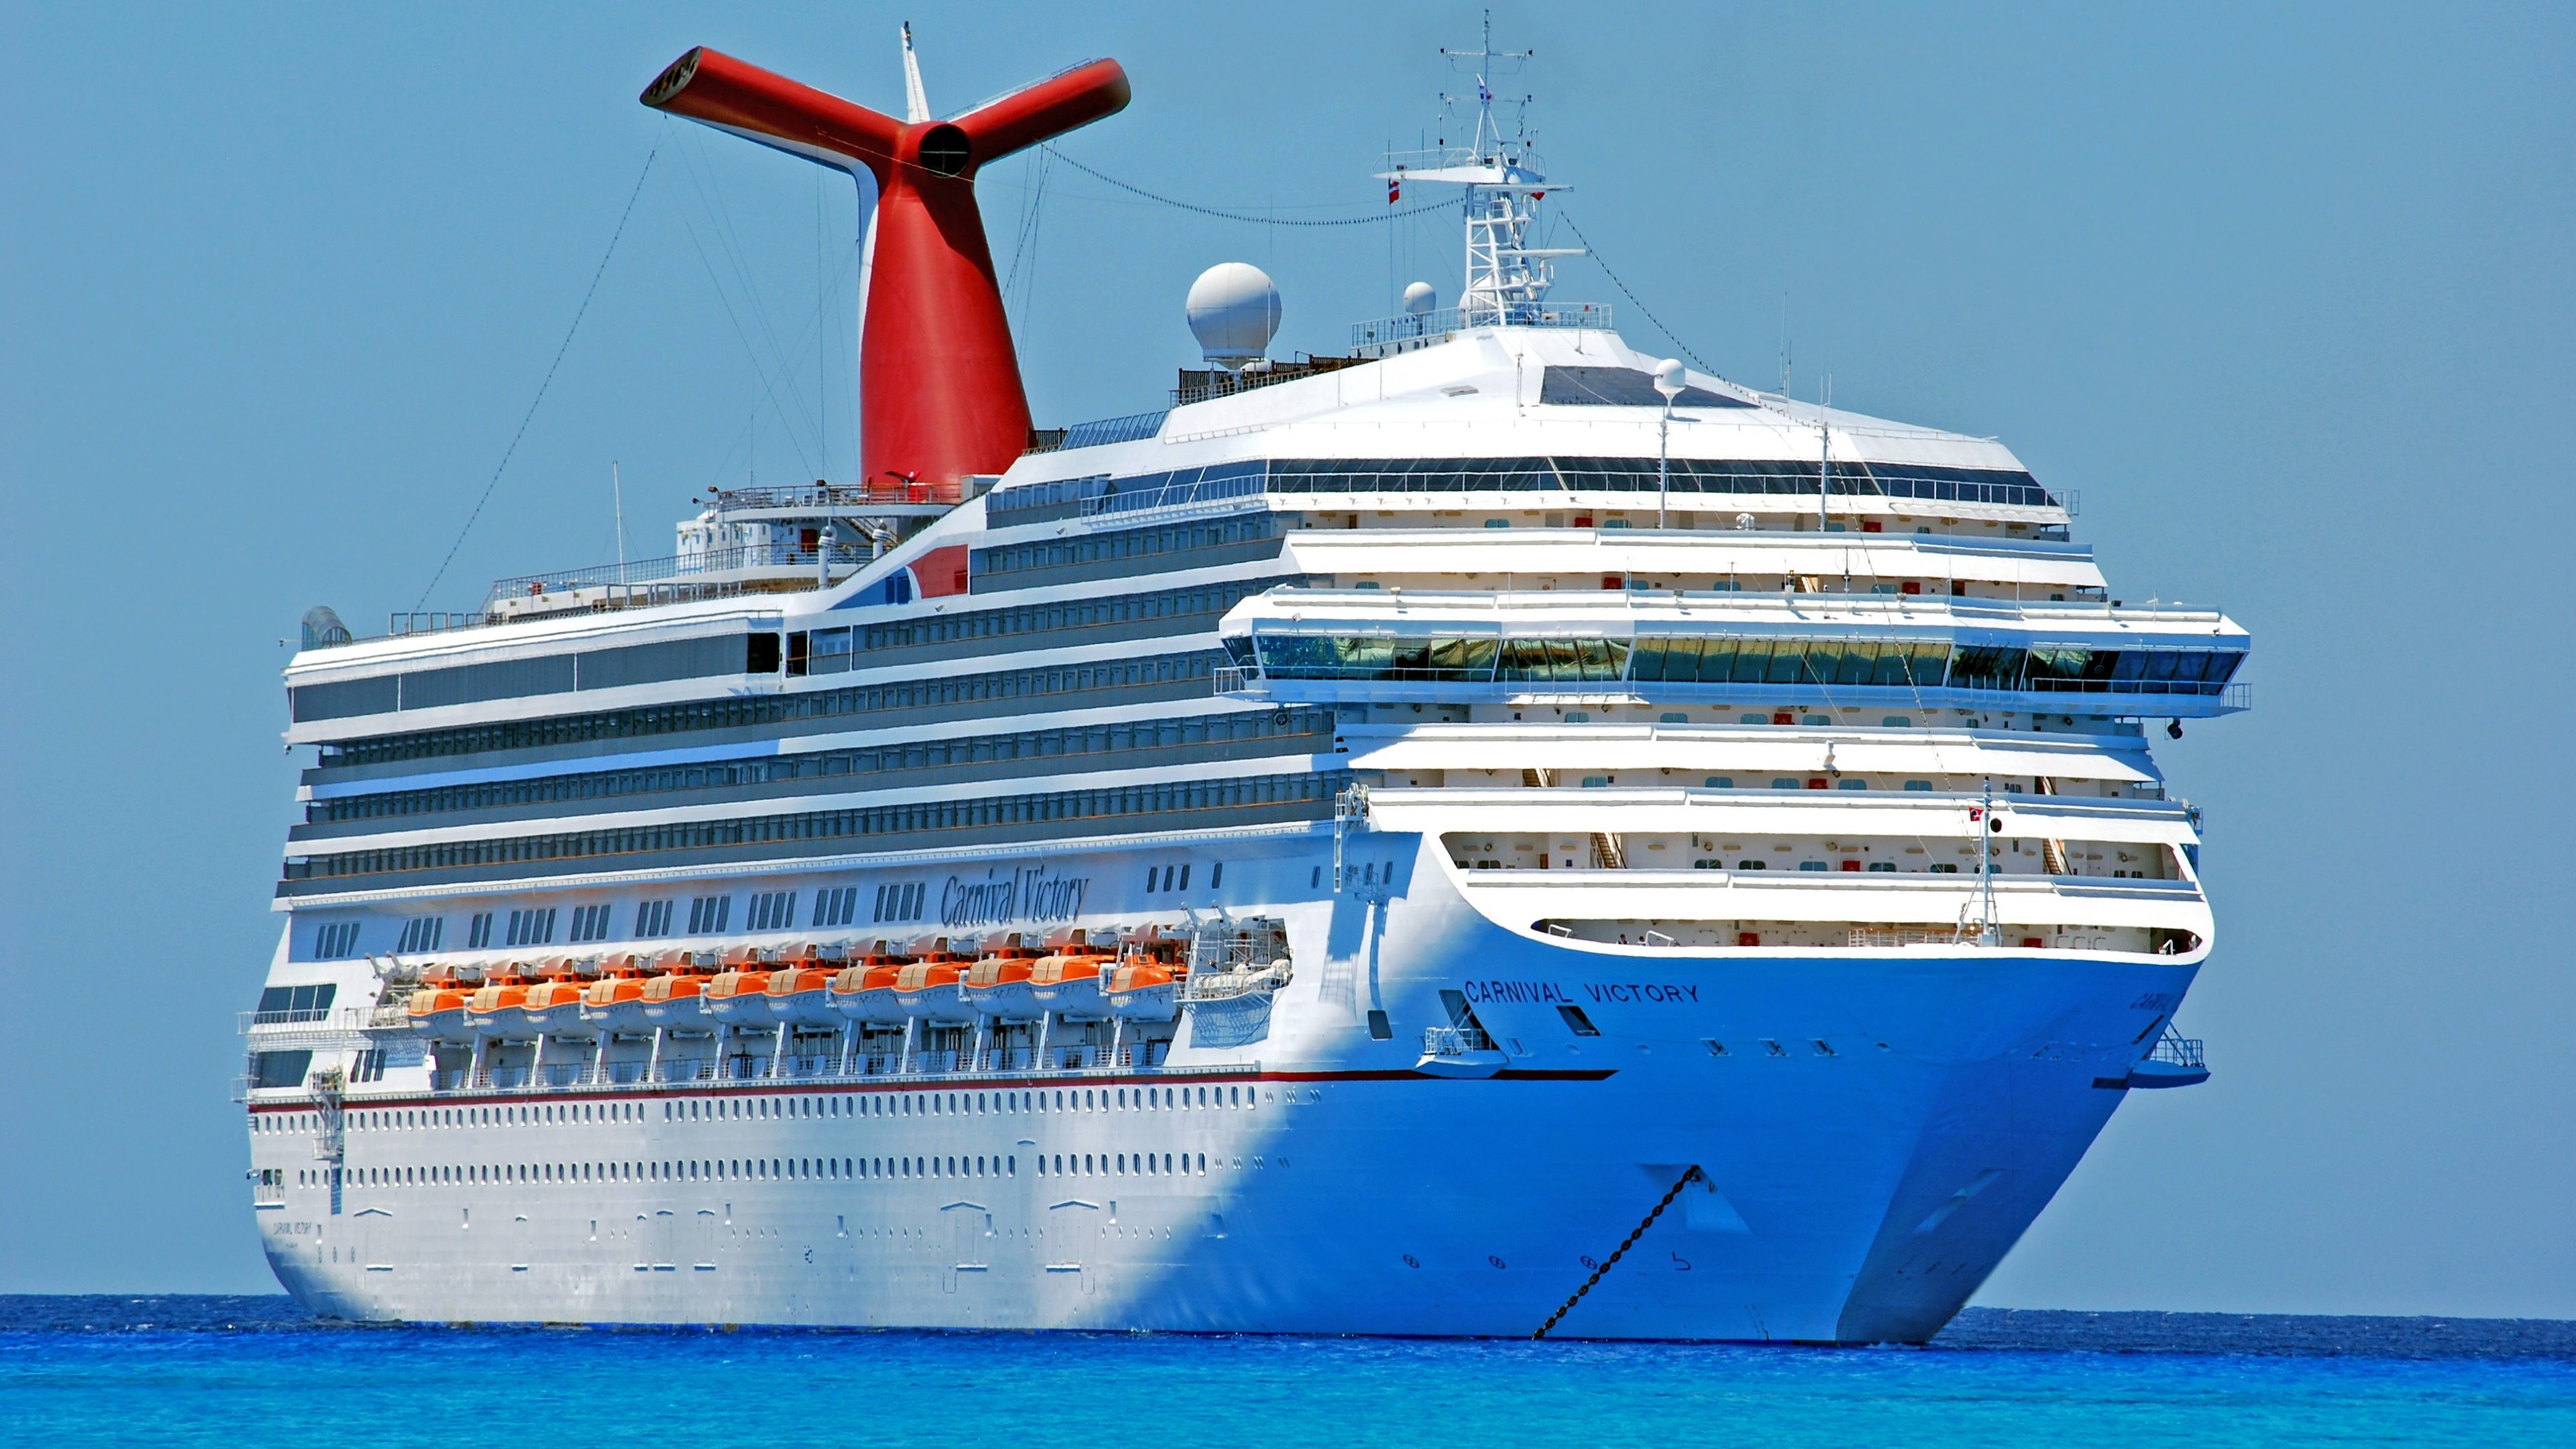 Cruiser (Ship): The 13-deck Carnival Victory, One of the largest cruise ships in the world, Debuted in 2000. 3840x2160 4K Background.